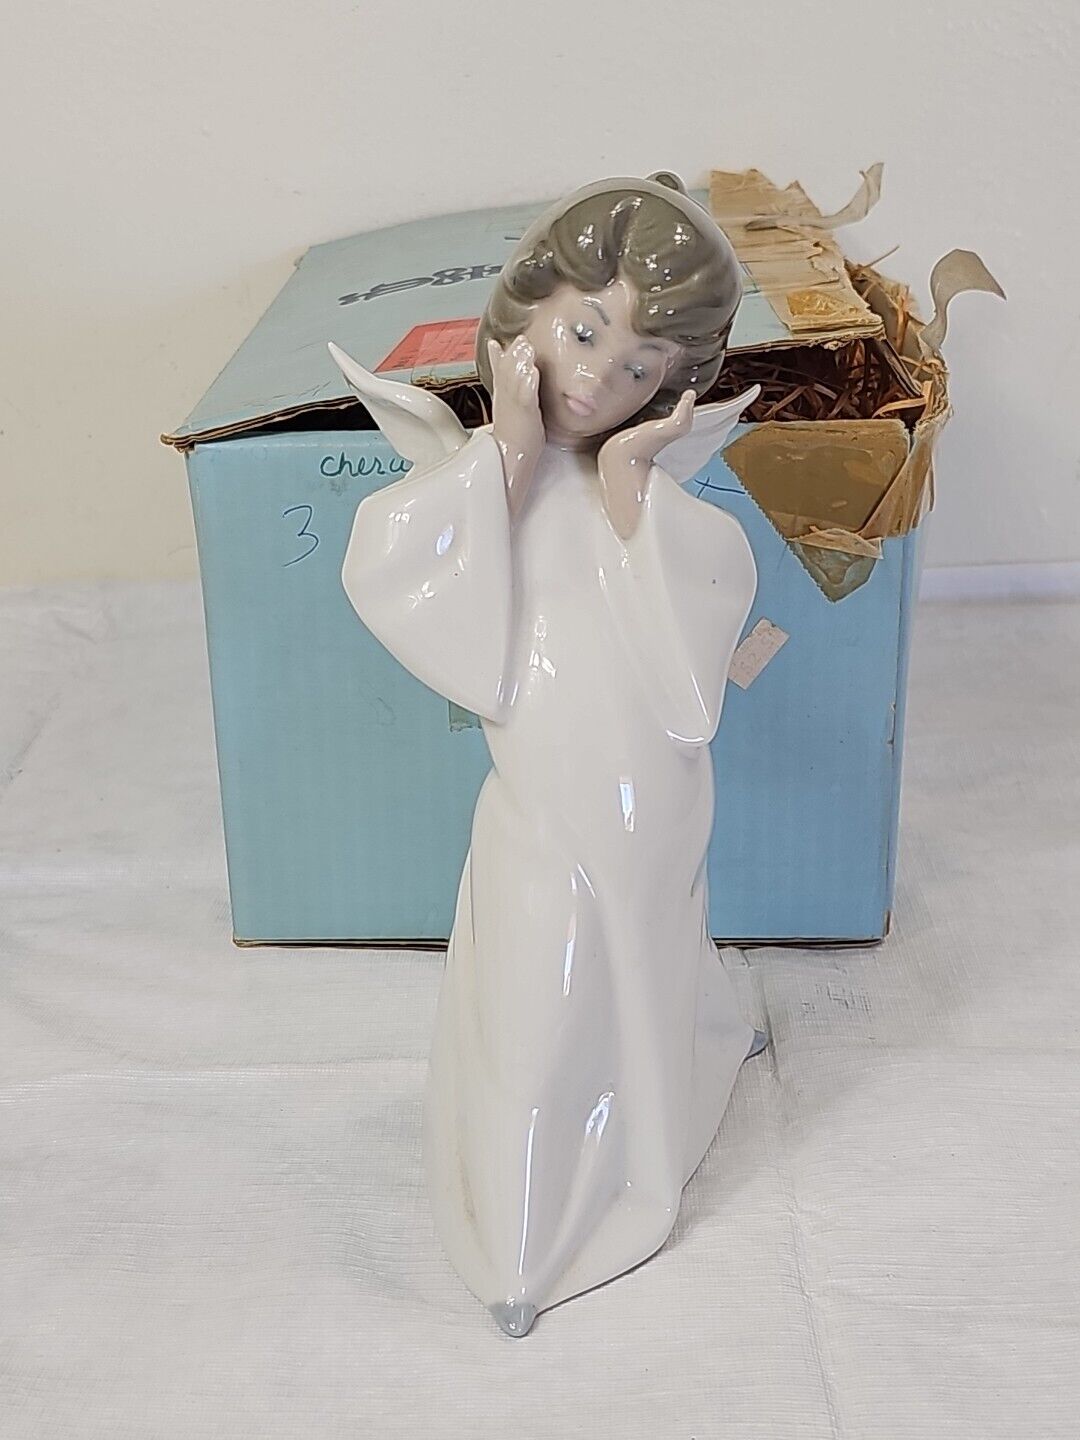 LLADRO MIME ANGEL Figurine 4959 Retired Original Box Small Chip On Wing Tip 